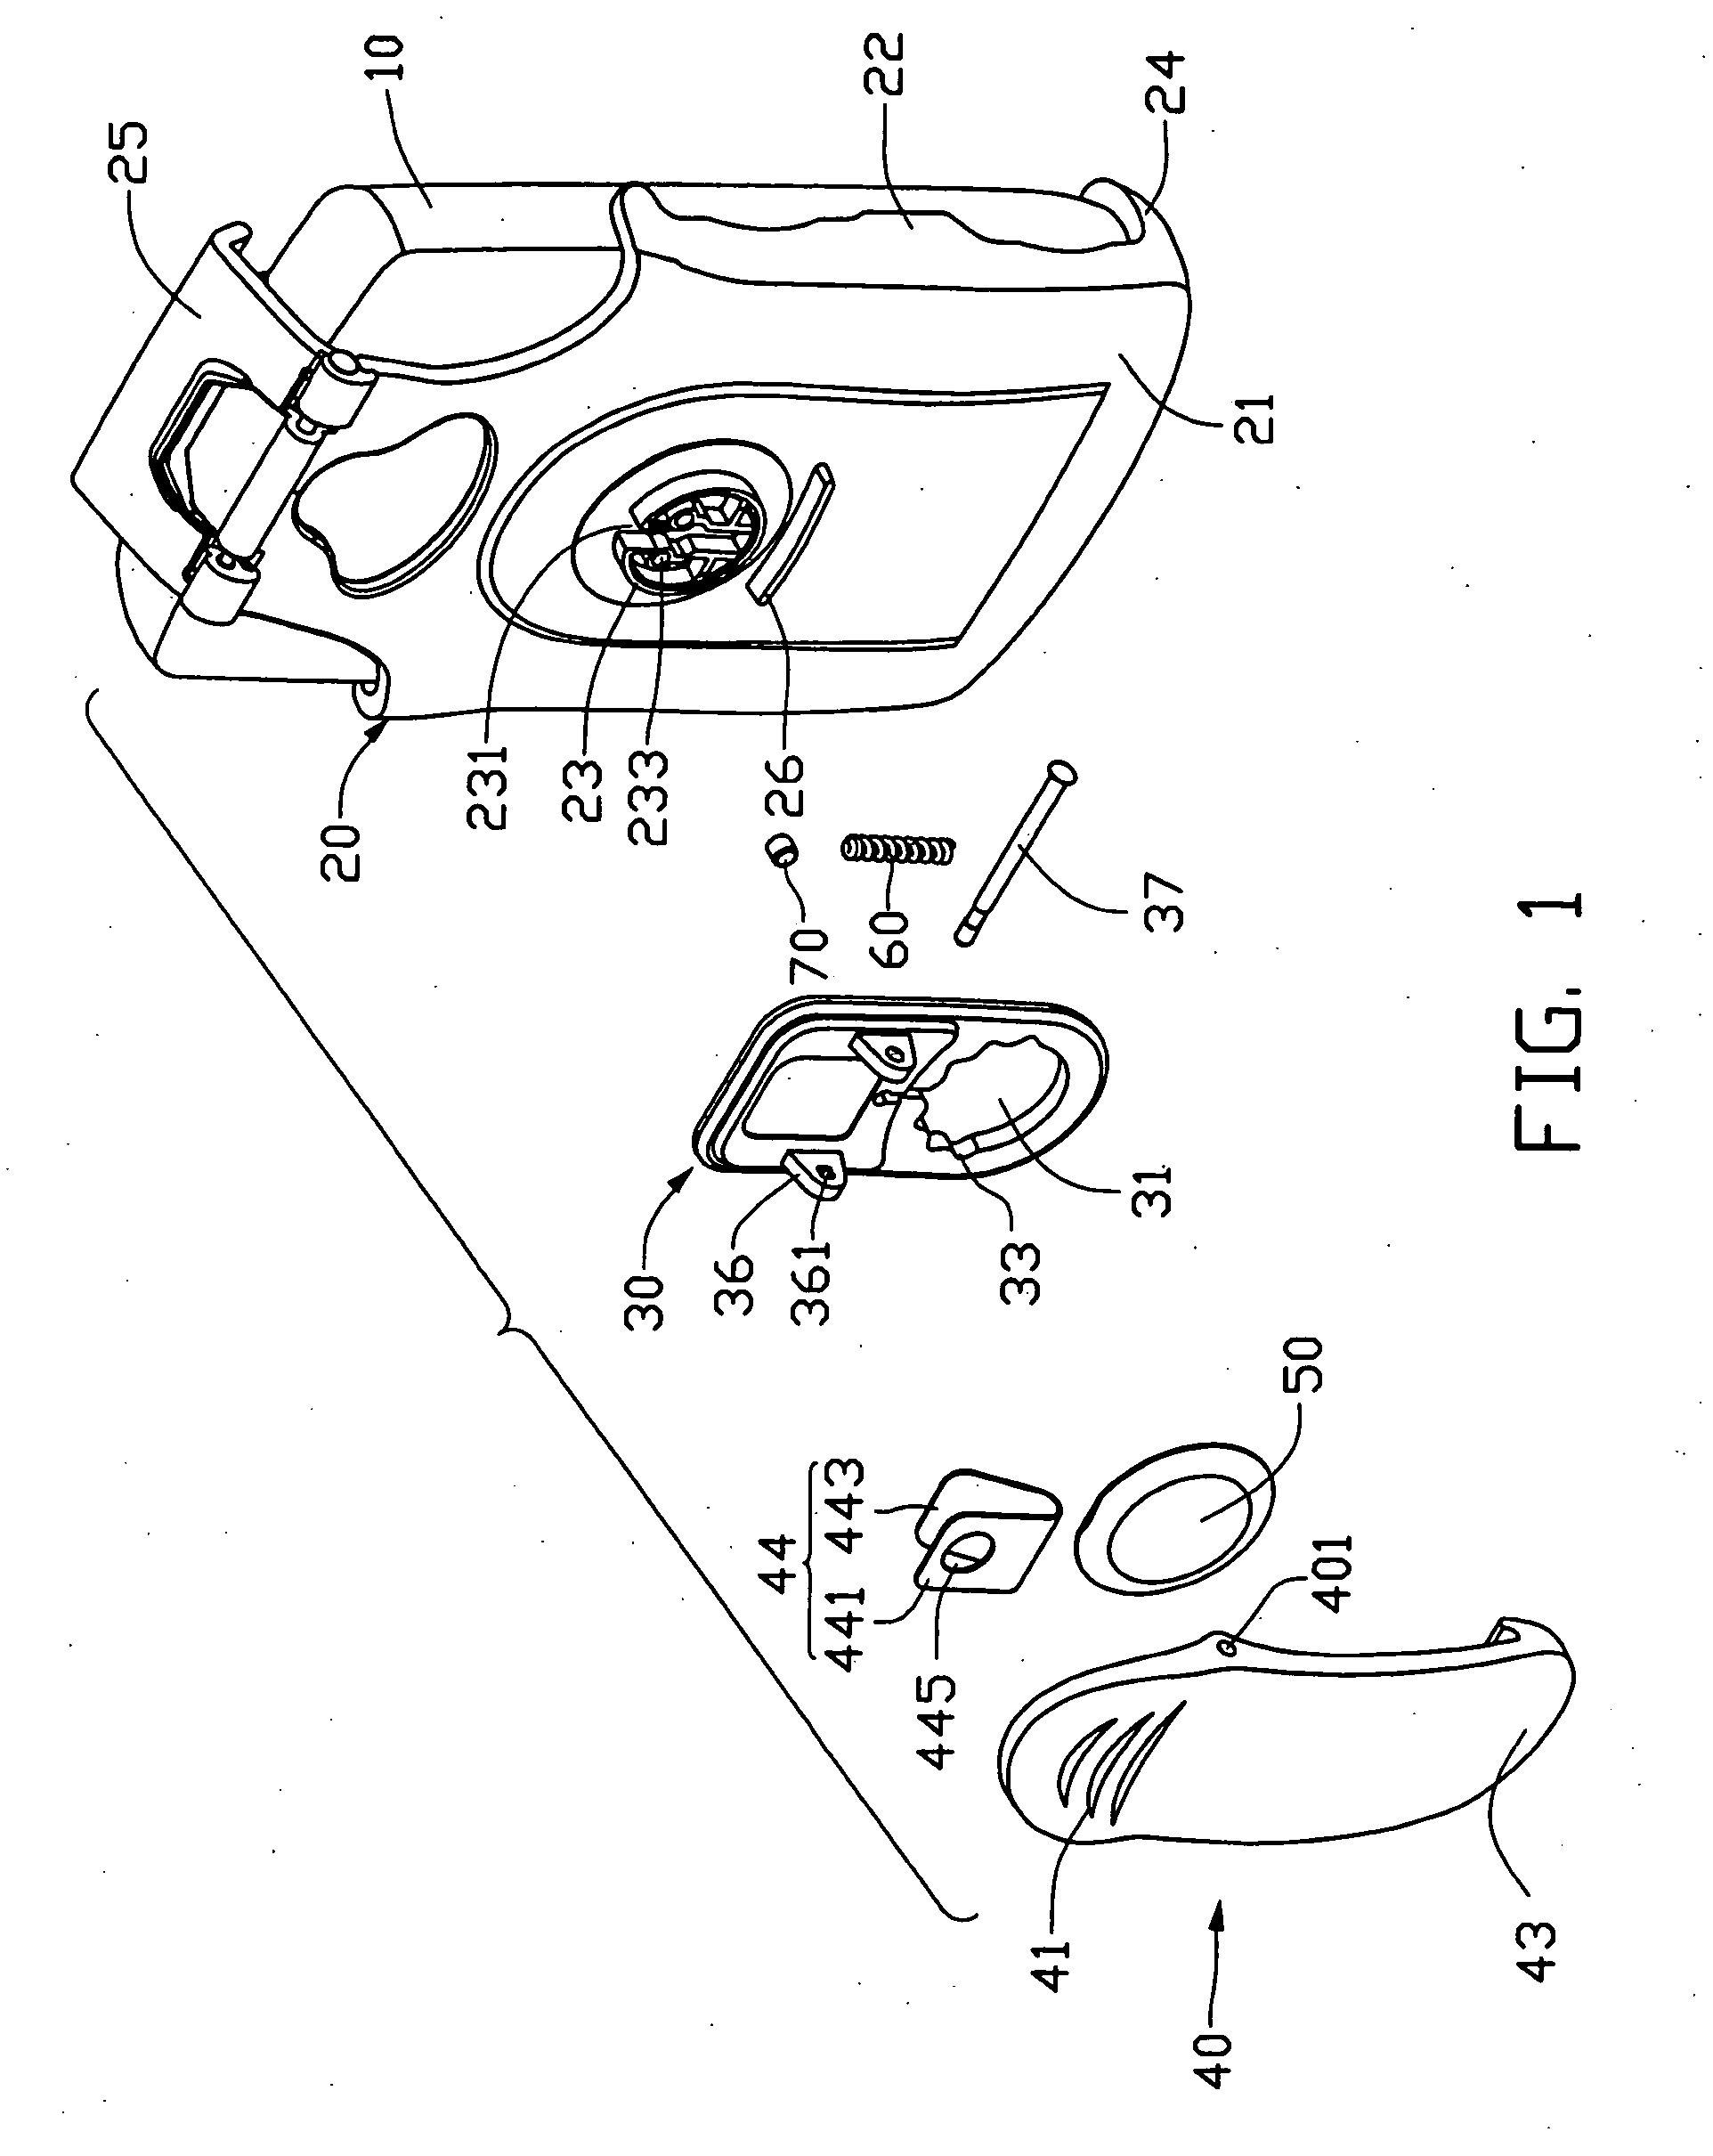 Carry assembly for portable electronic device